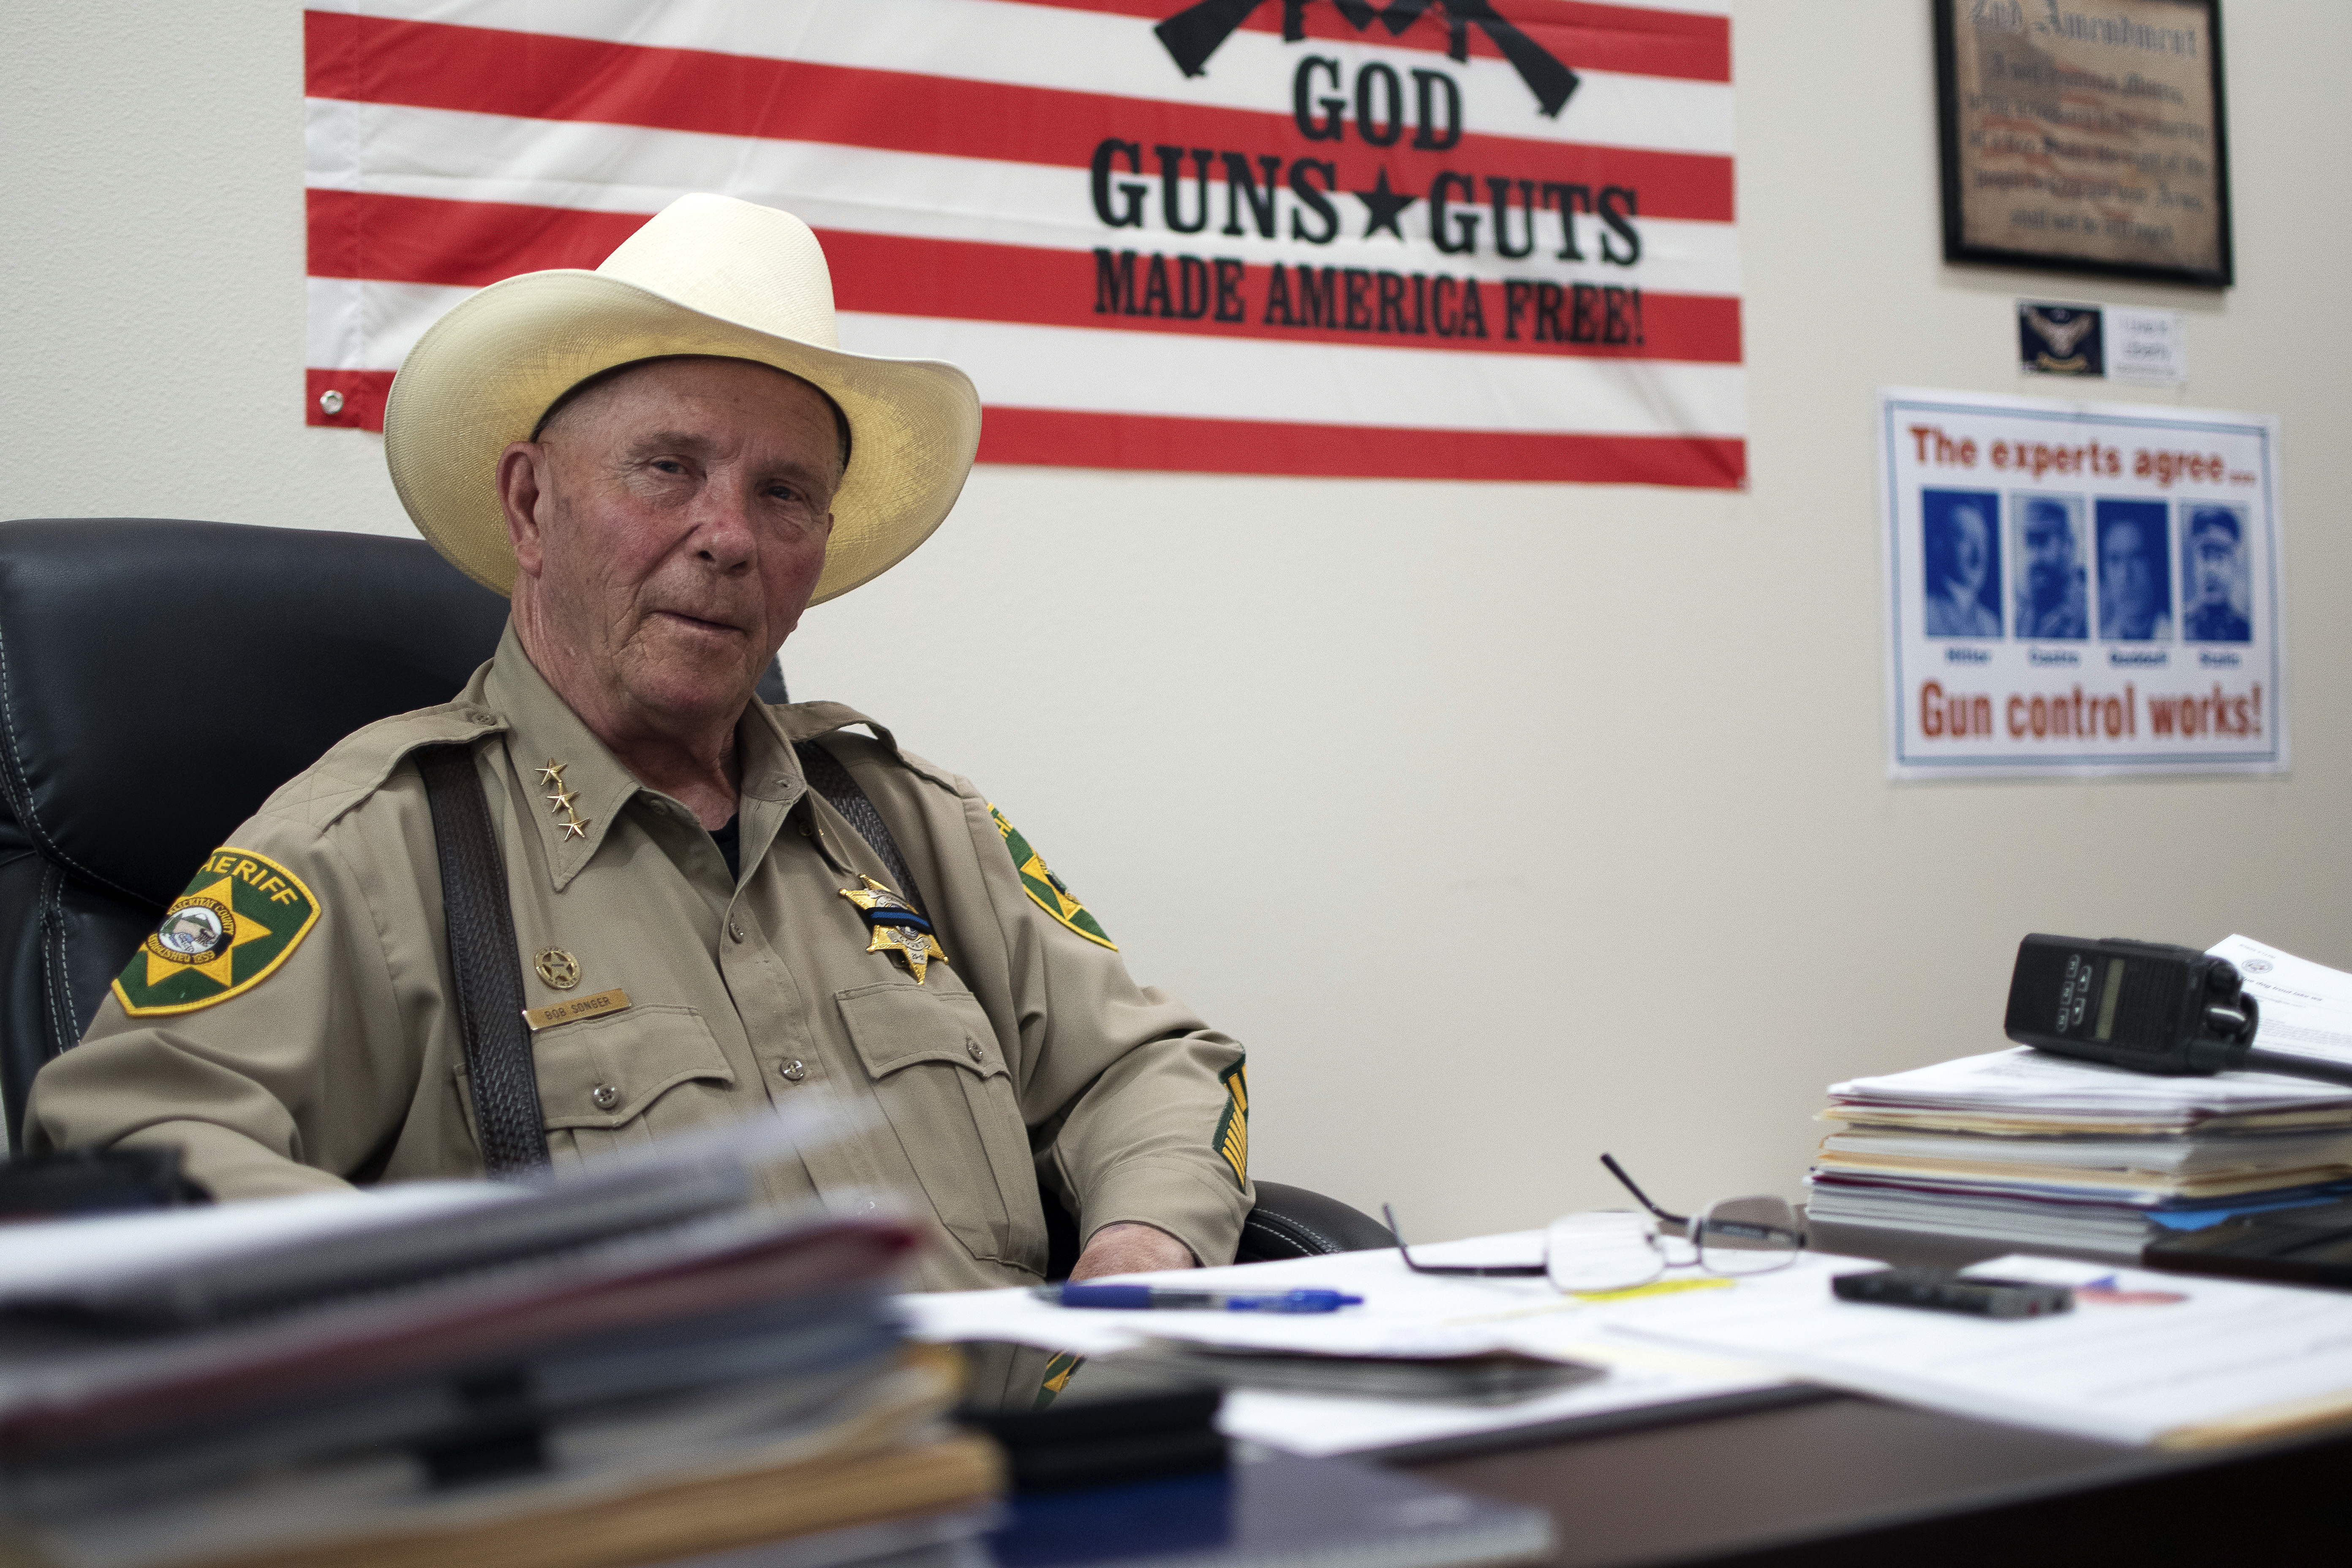 A right-wing sheriffs group that challenges federal law is gaining  acceptance around the country